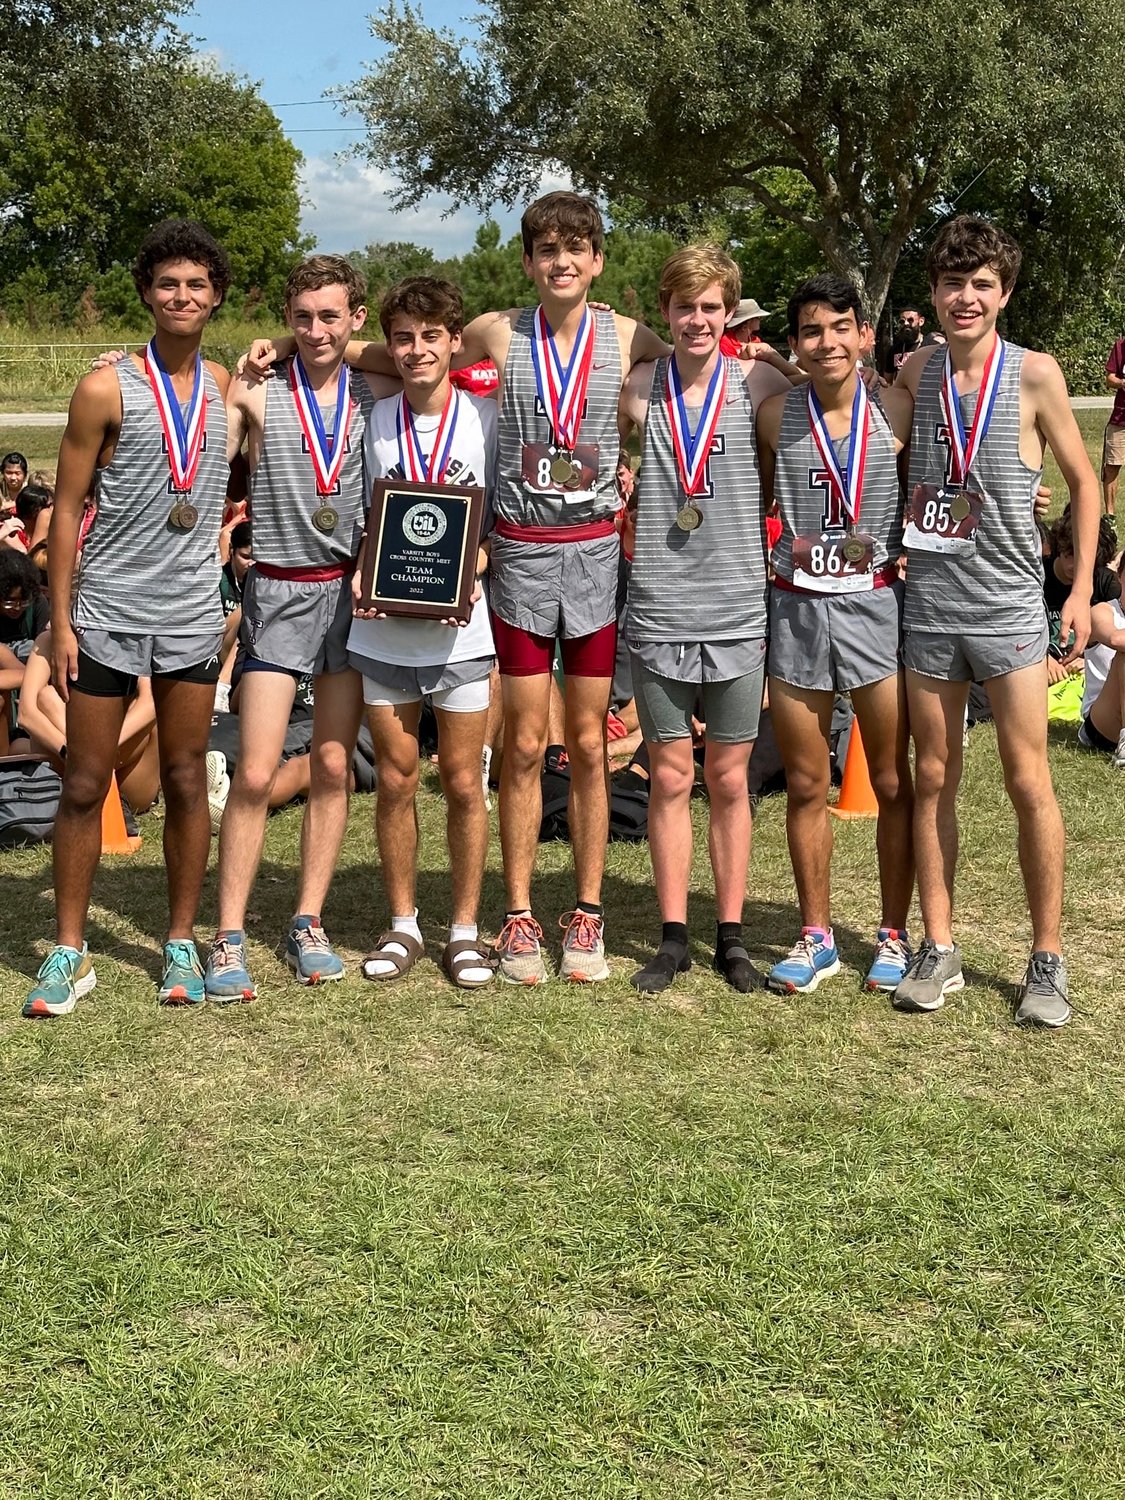 The Tompkins boys cross country team celebrates winning the District 19-6A cross country meet on Thursday morning at Paul D. Rushing Park.